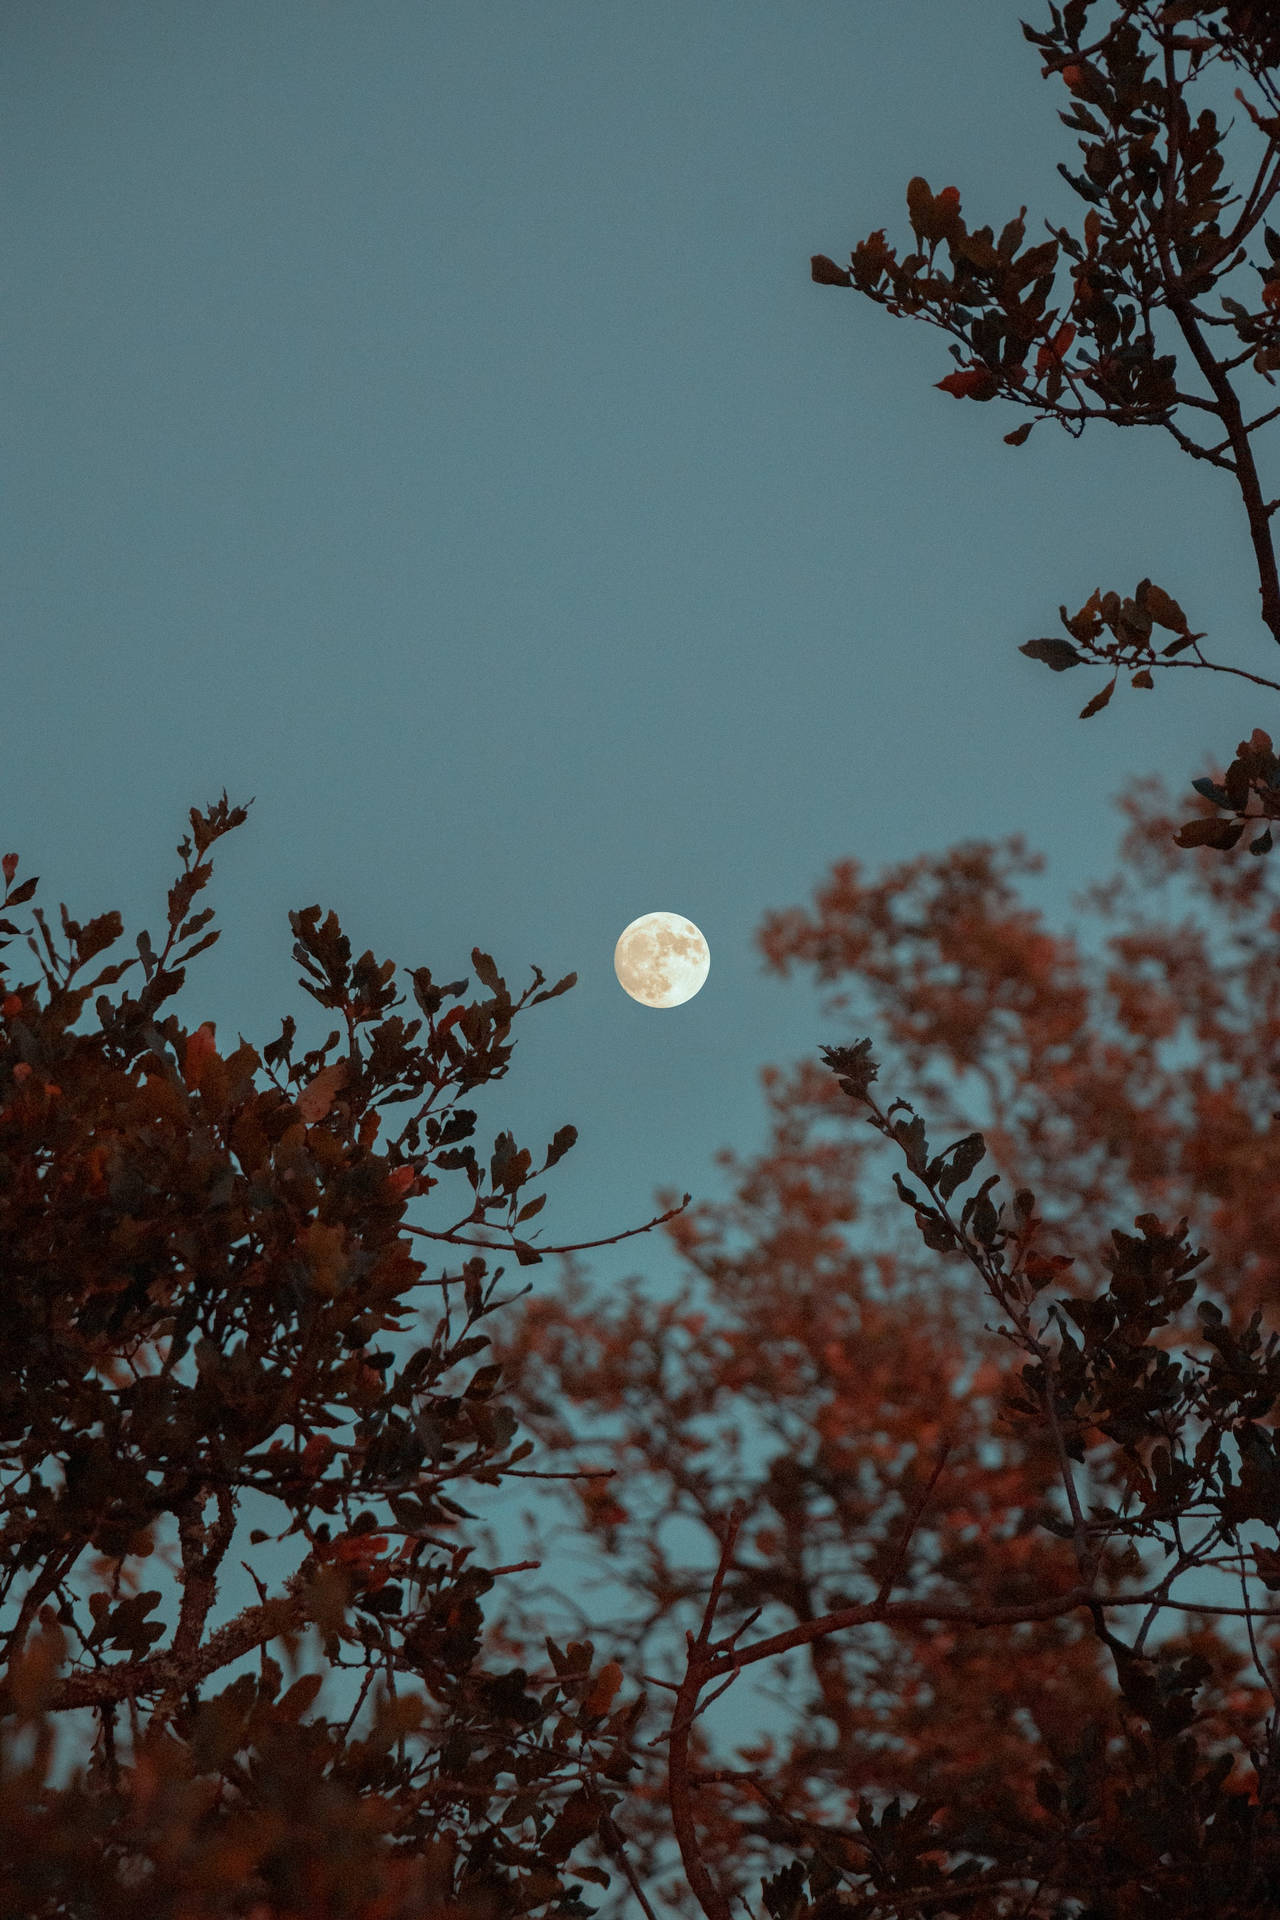 Luna Photograph With Trees At Night Wallpaper